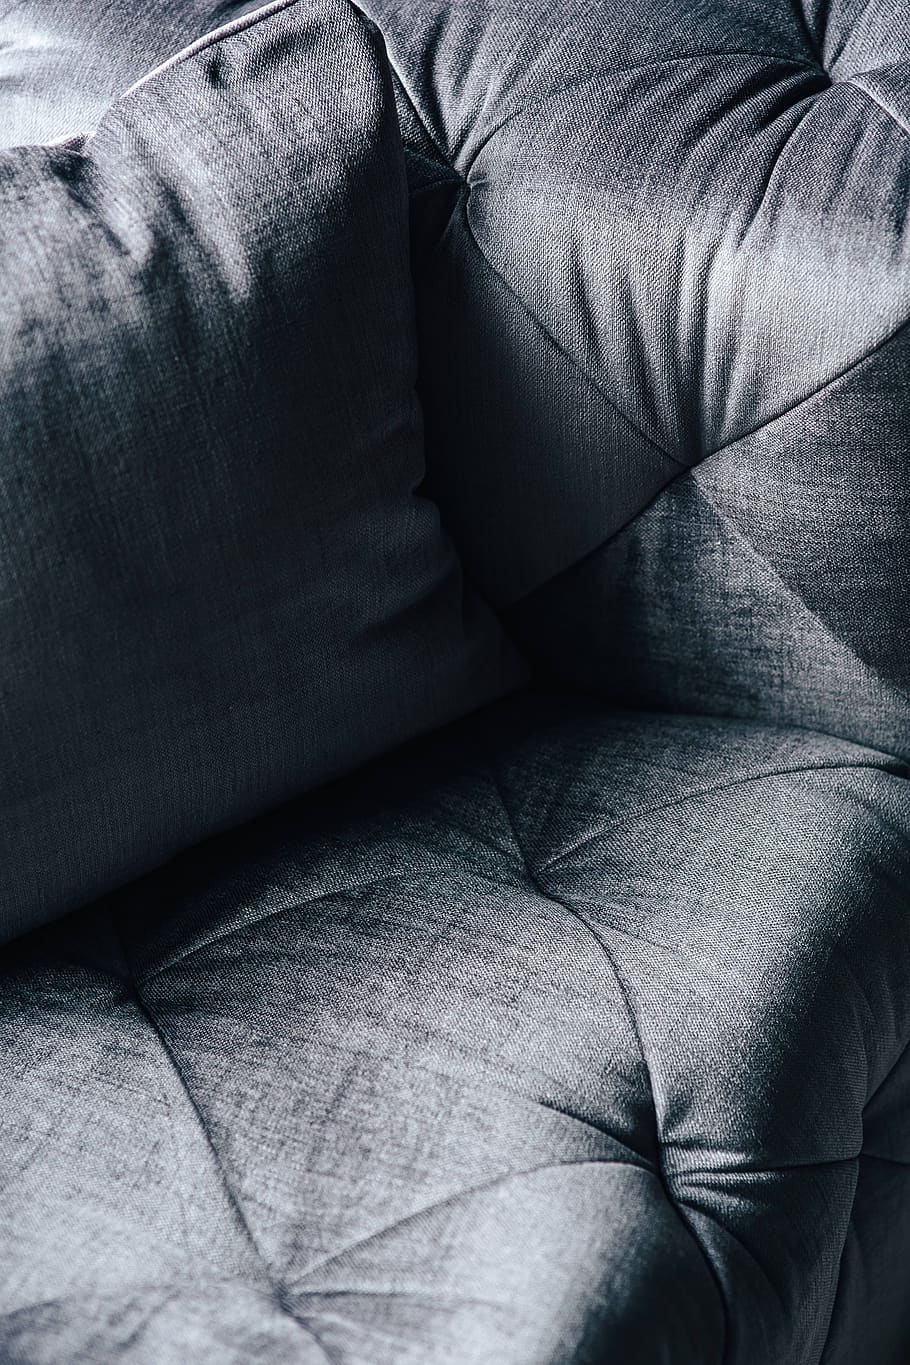 sofa, grey, bed, couch, material, settee, pillow, soft, sitting, Close-ups